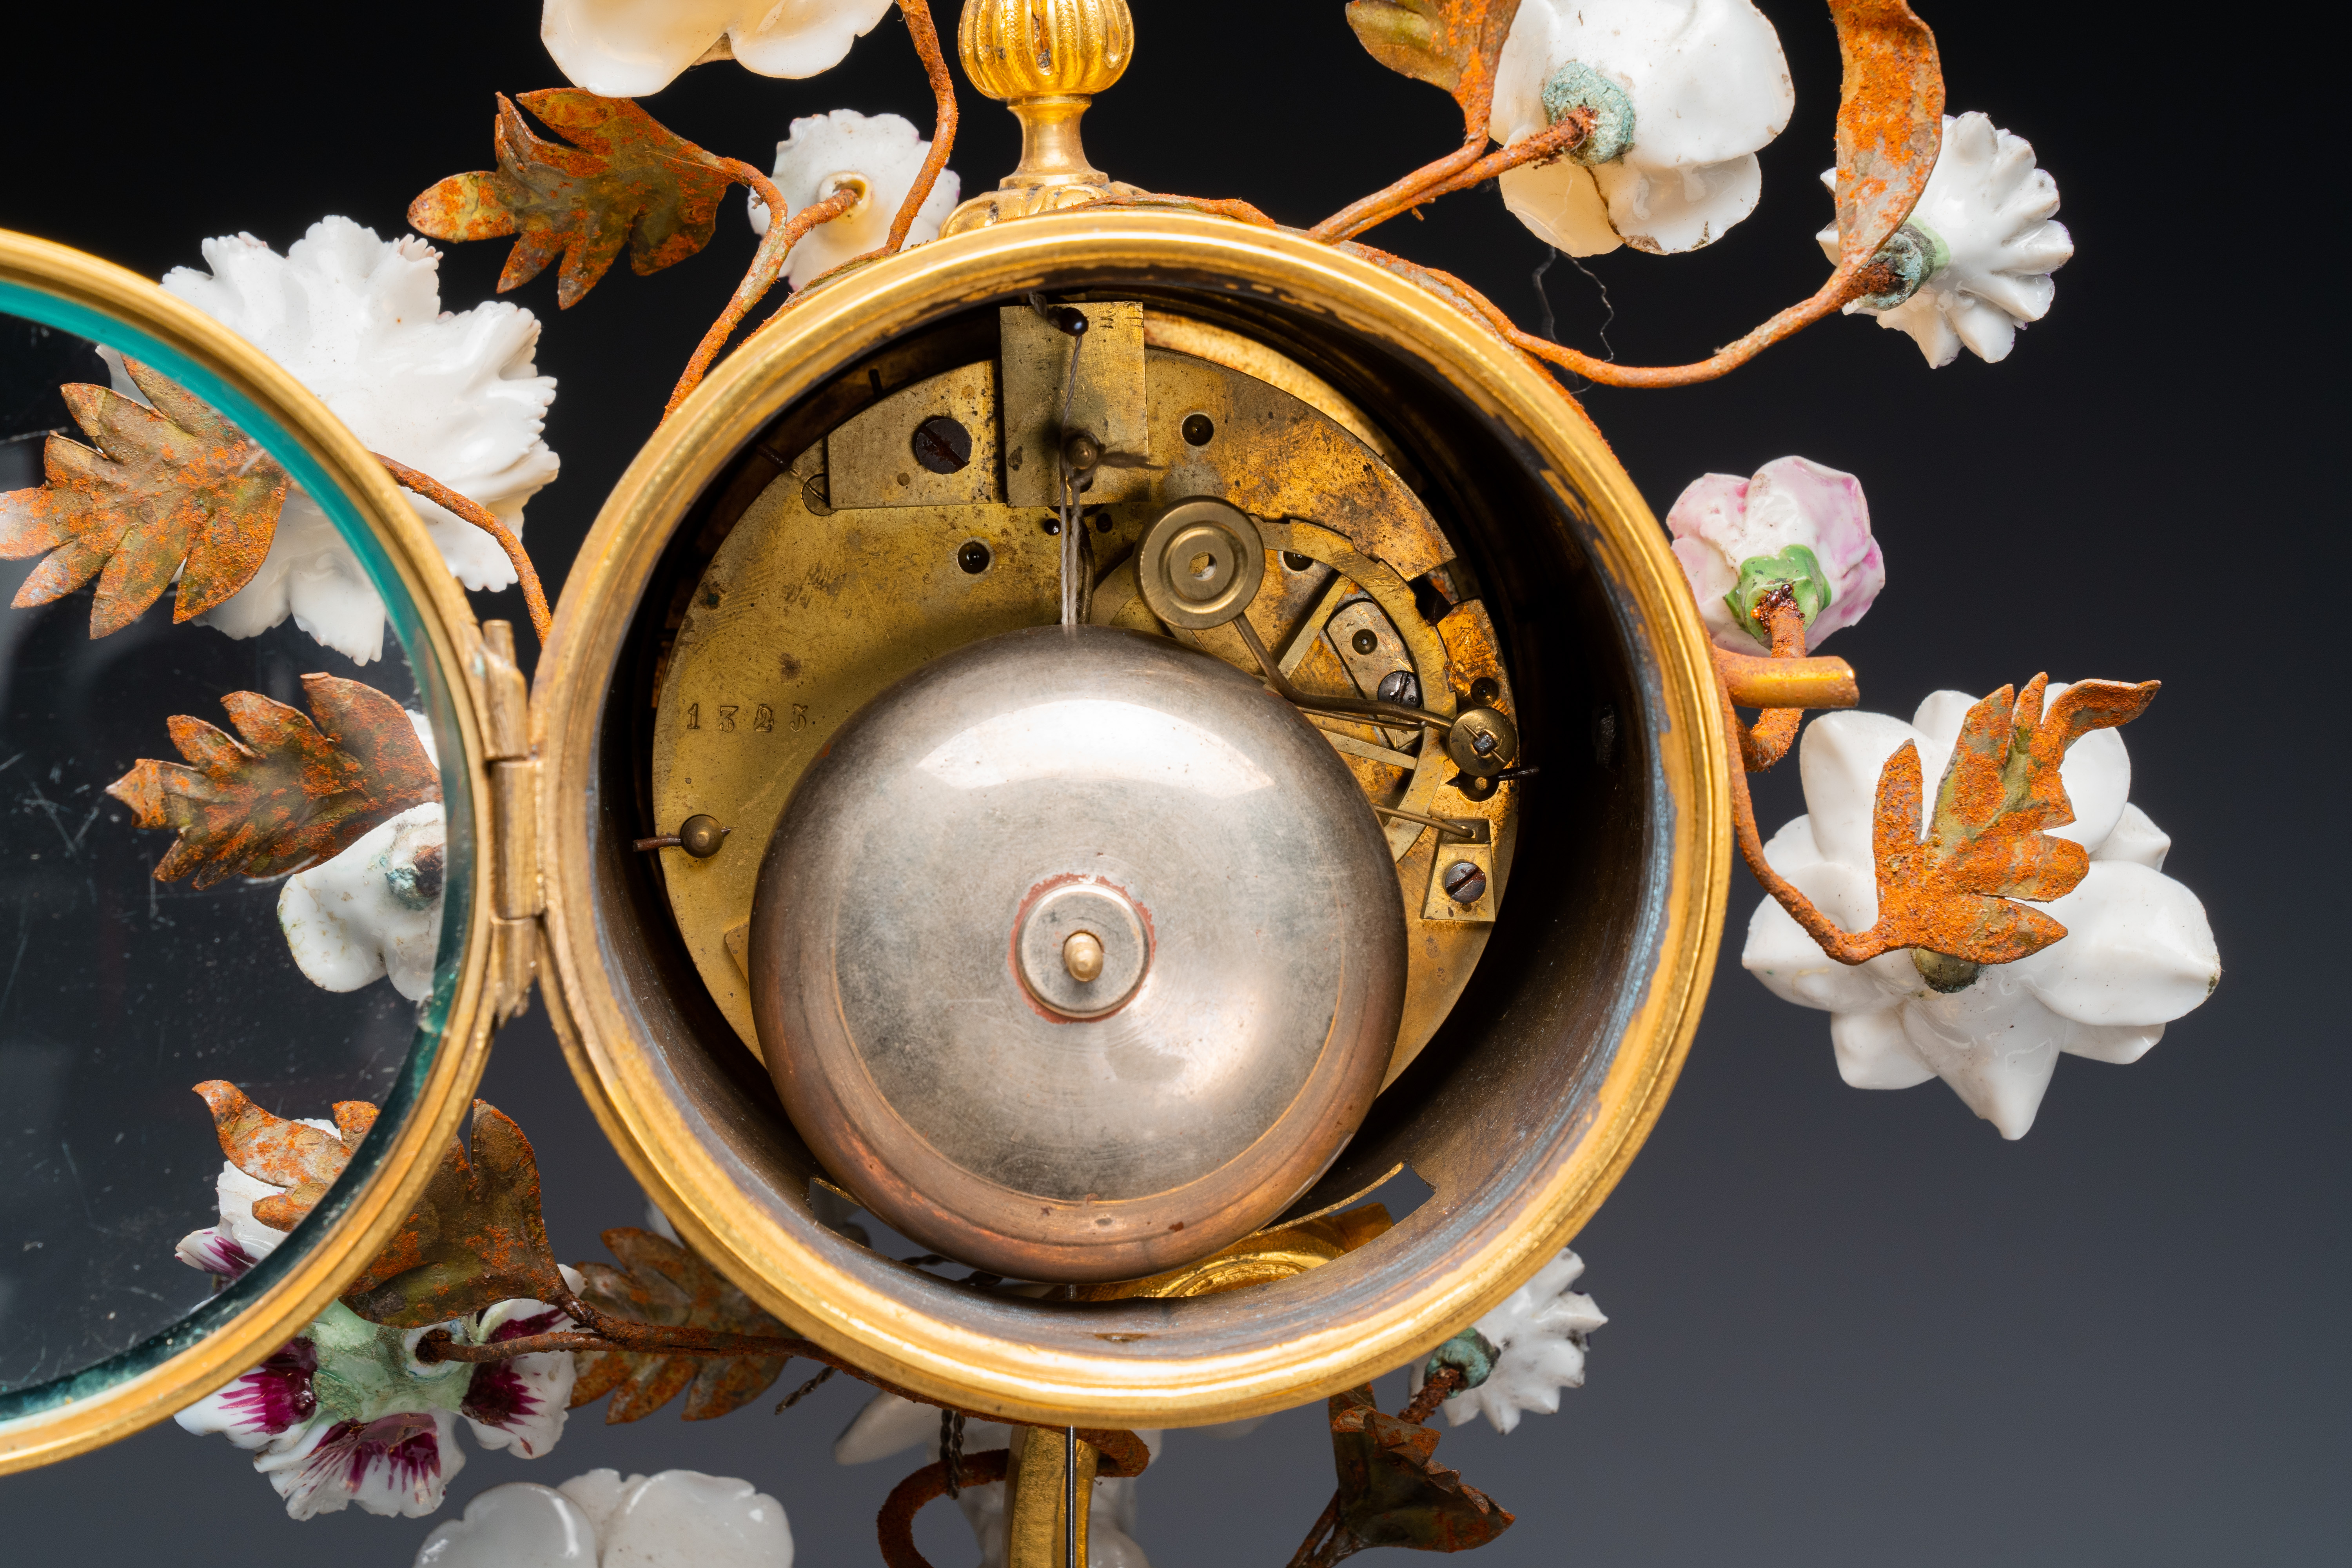 A French ormolu-mounted porcelain mantel clock, 18/19th C. - Image 14 of 28